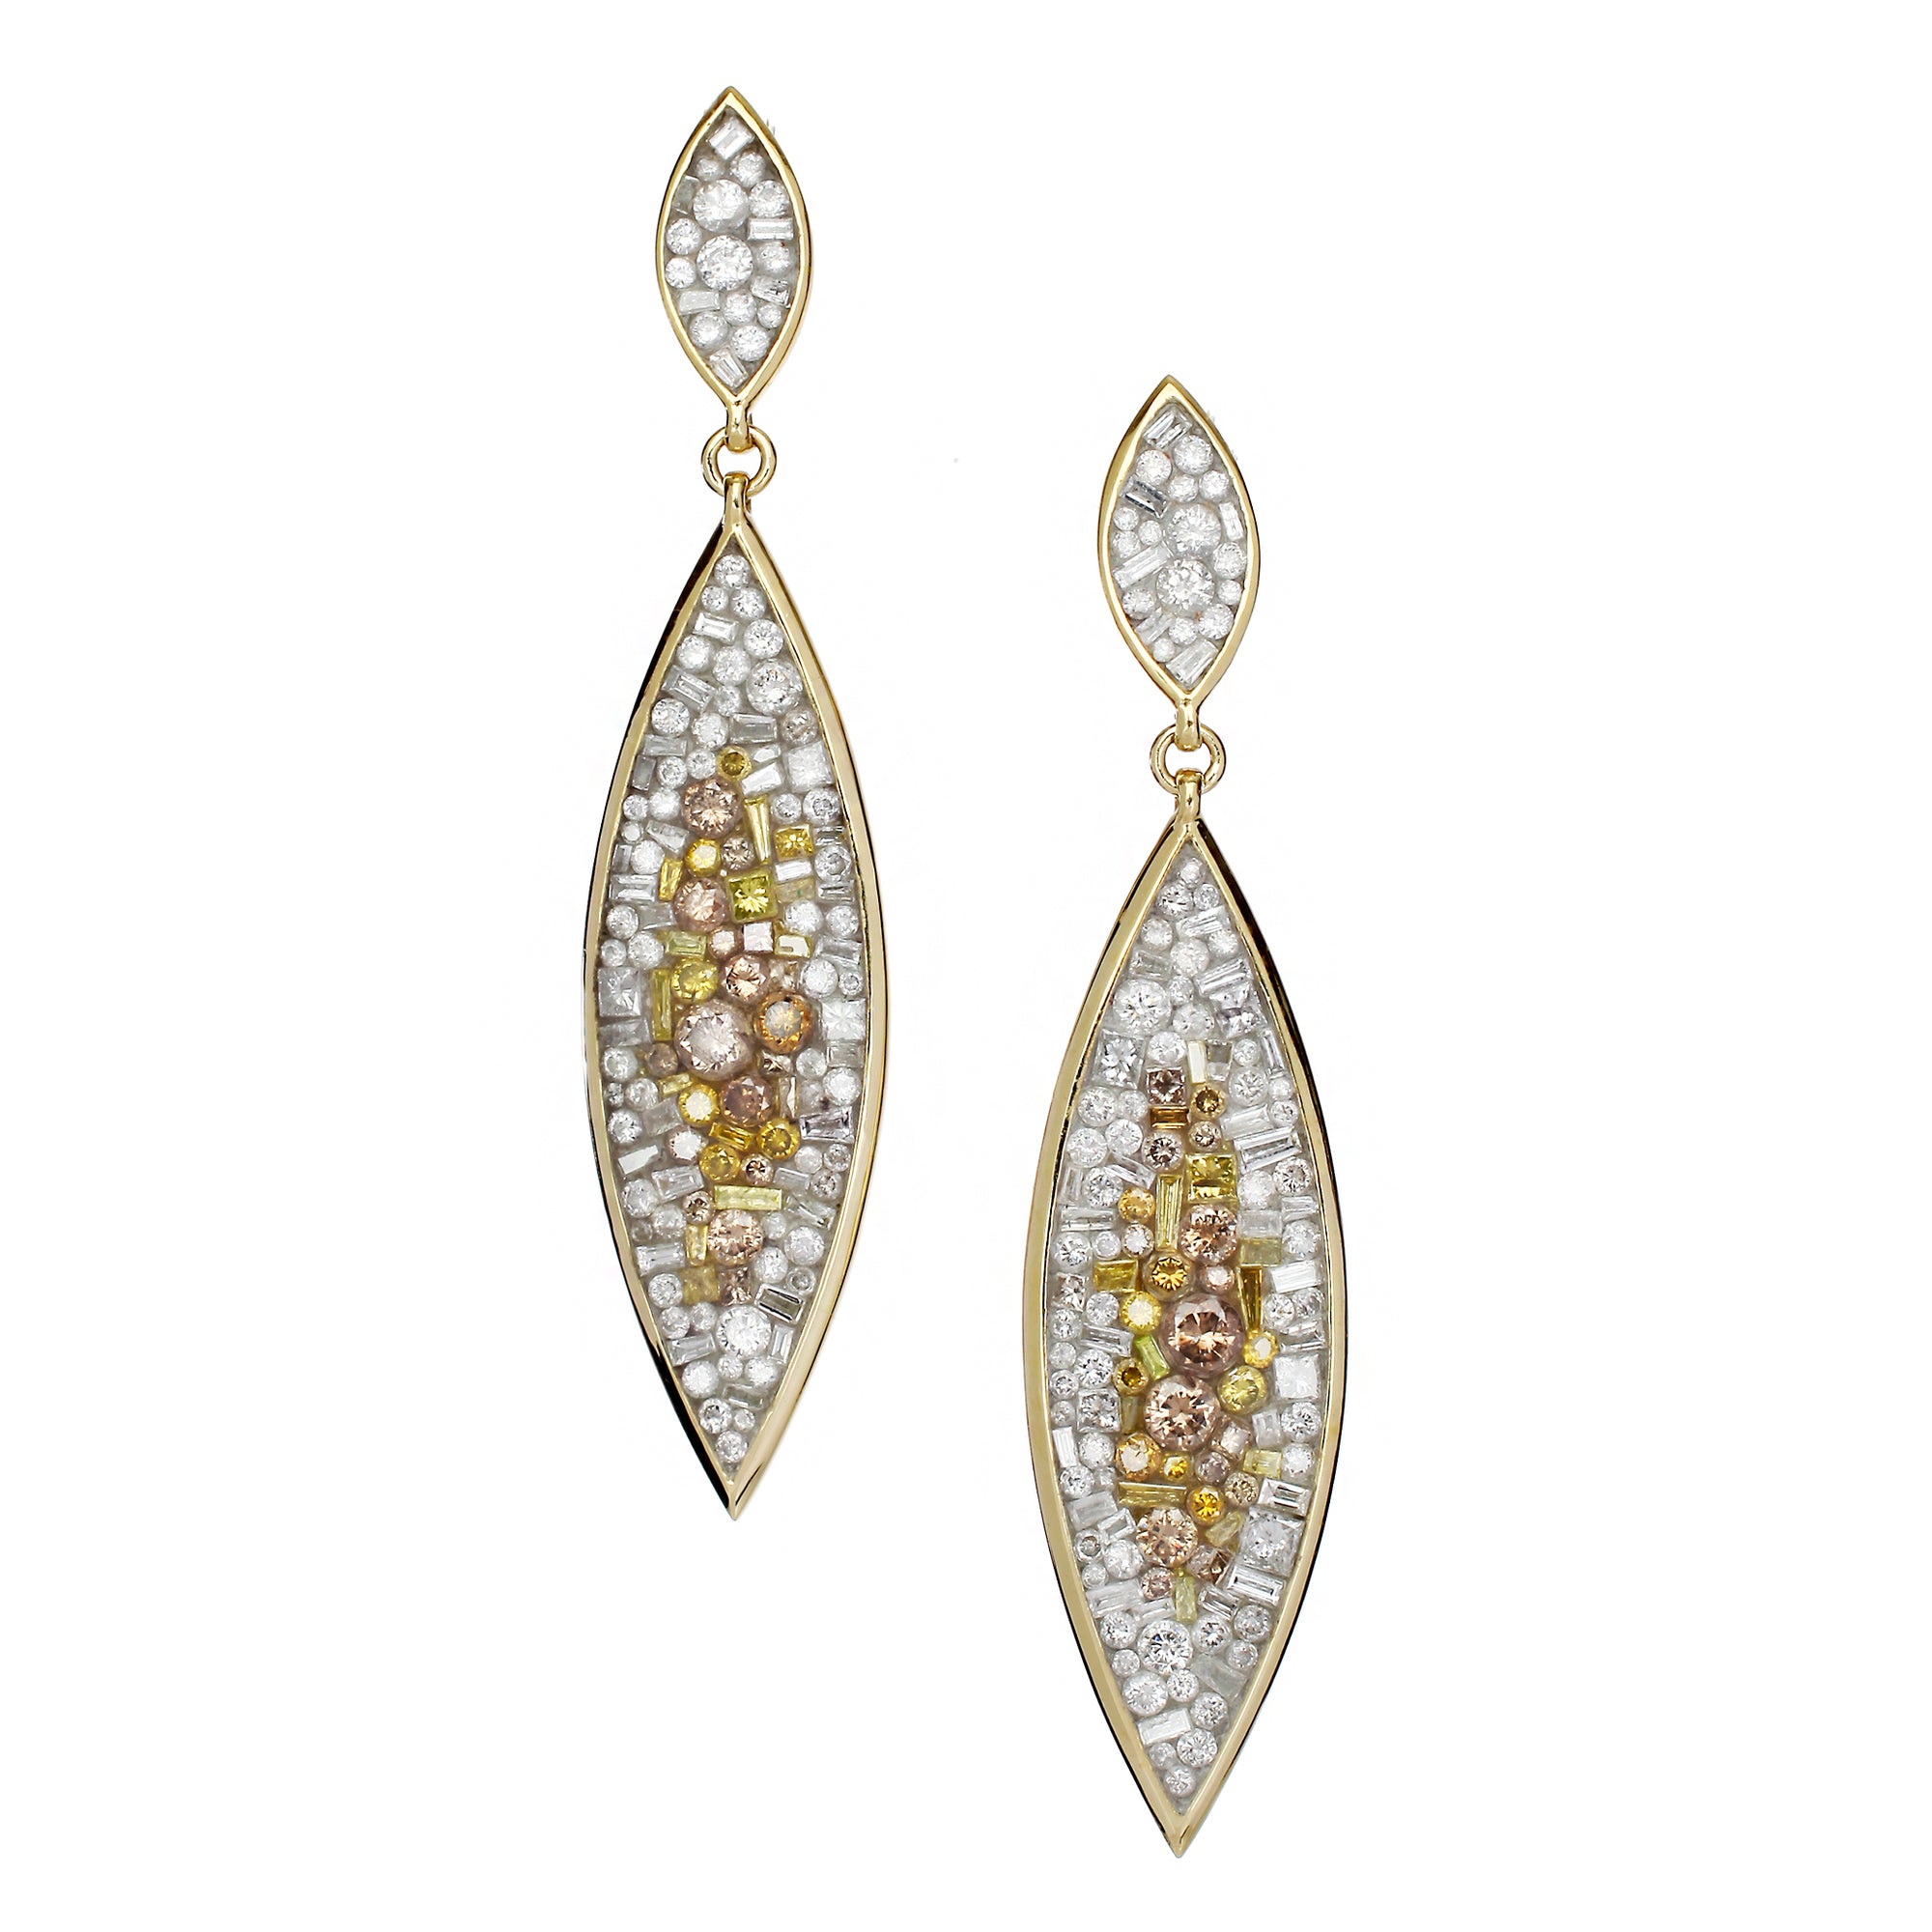 Sun Burst Marquise Diamond Earrings by Pleve available at Talisman Collection Fine Jewelers in El Dorado Hills, CA and online. Specs: 4.50 cttw white & color enhanced diamonds, 18k yellow gold. 